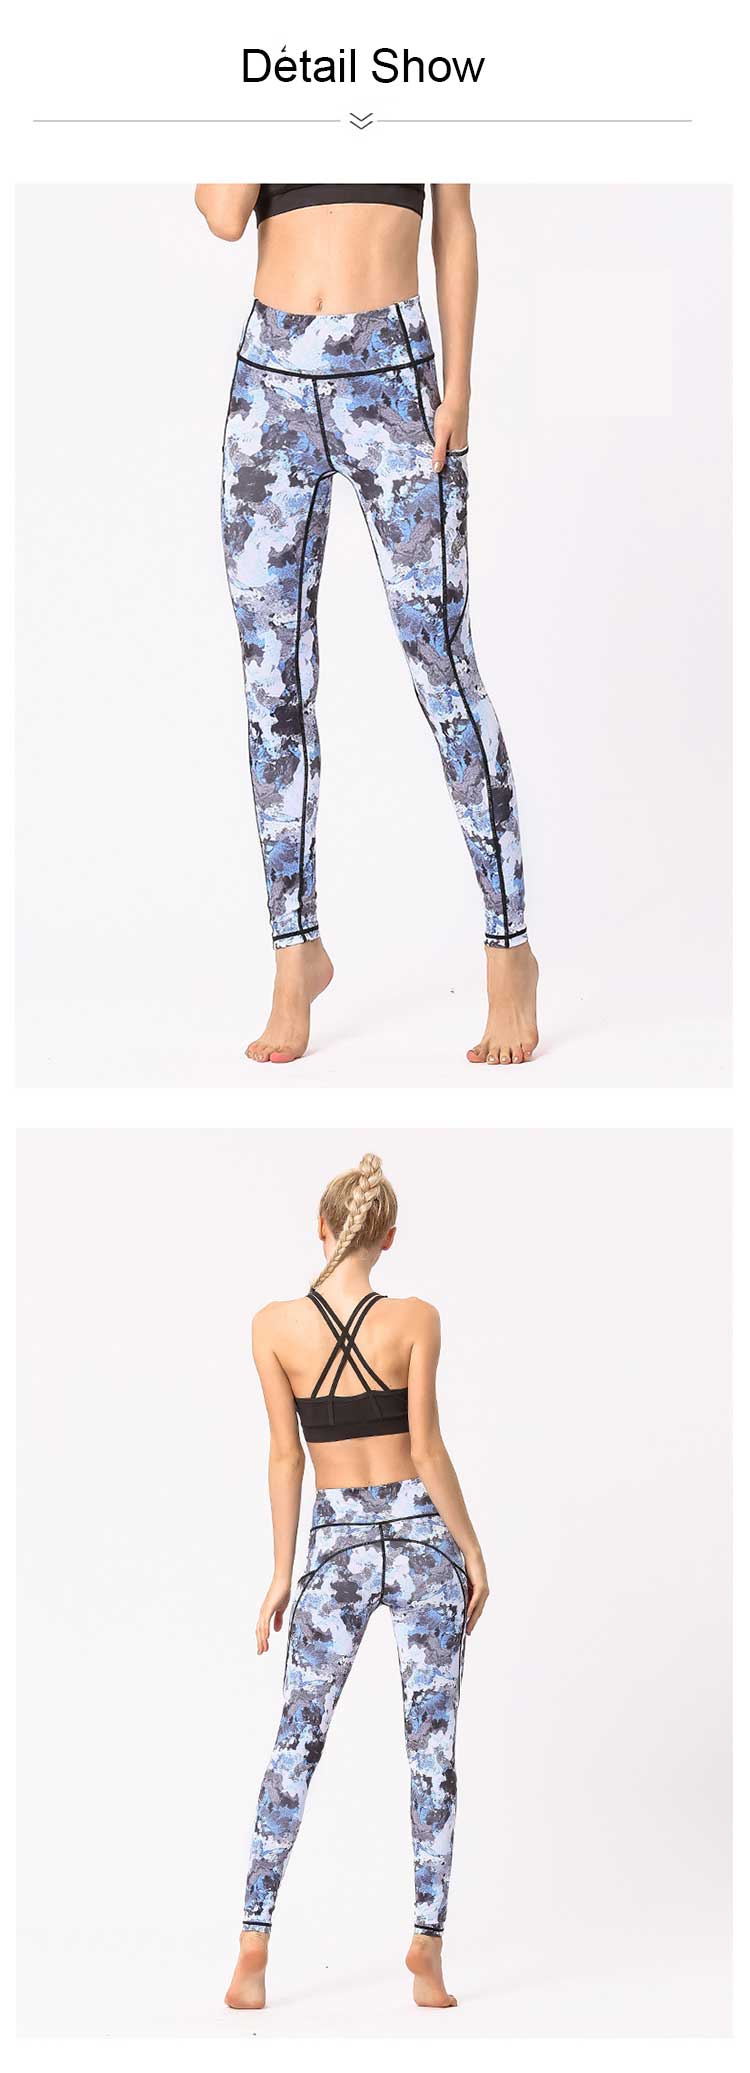 camouflage-yoga-pants-in-recent-years-are-no-longer-just-for-the-fitness